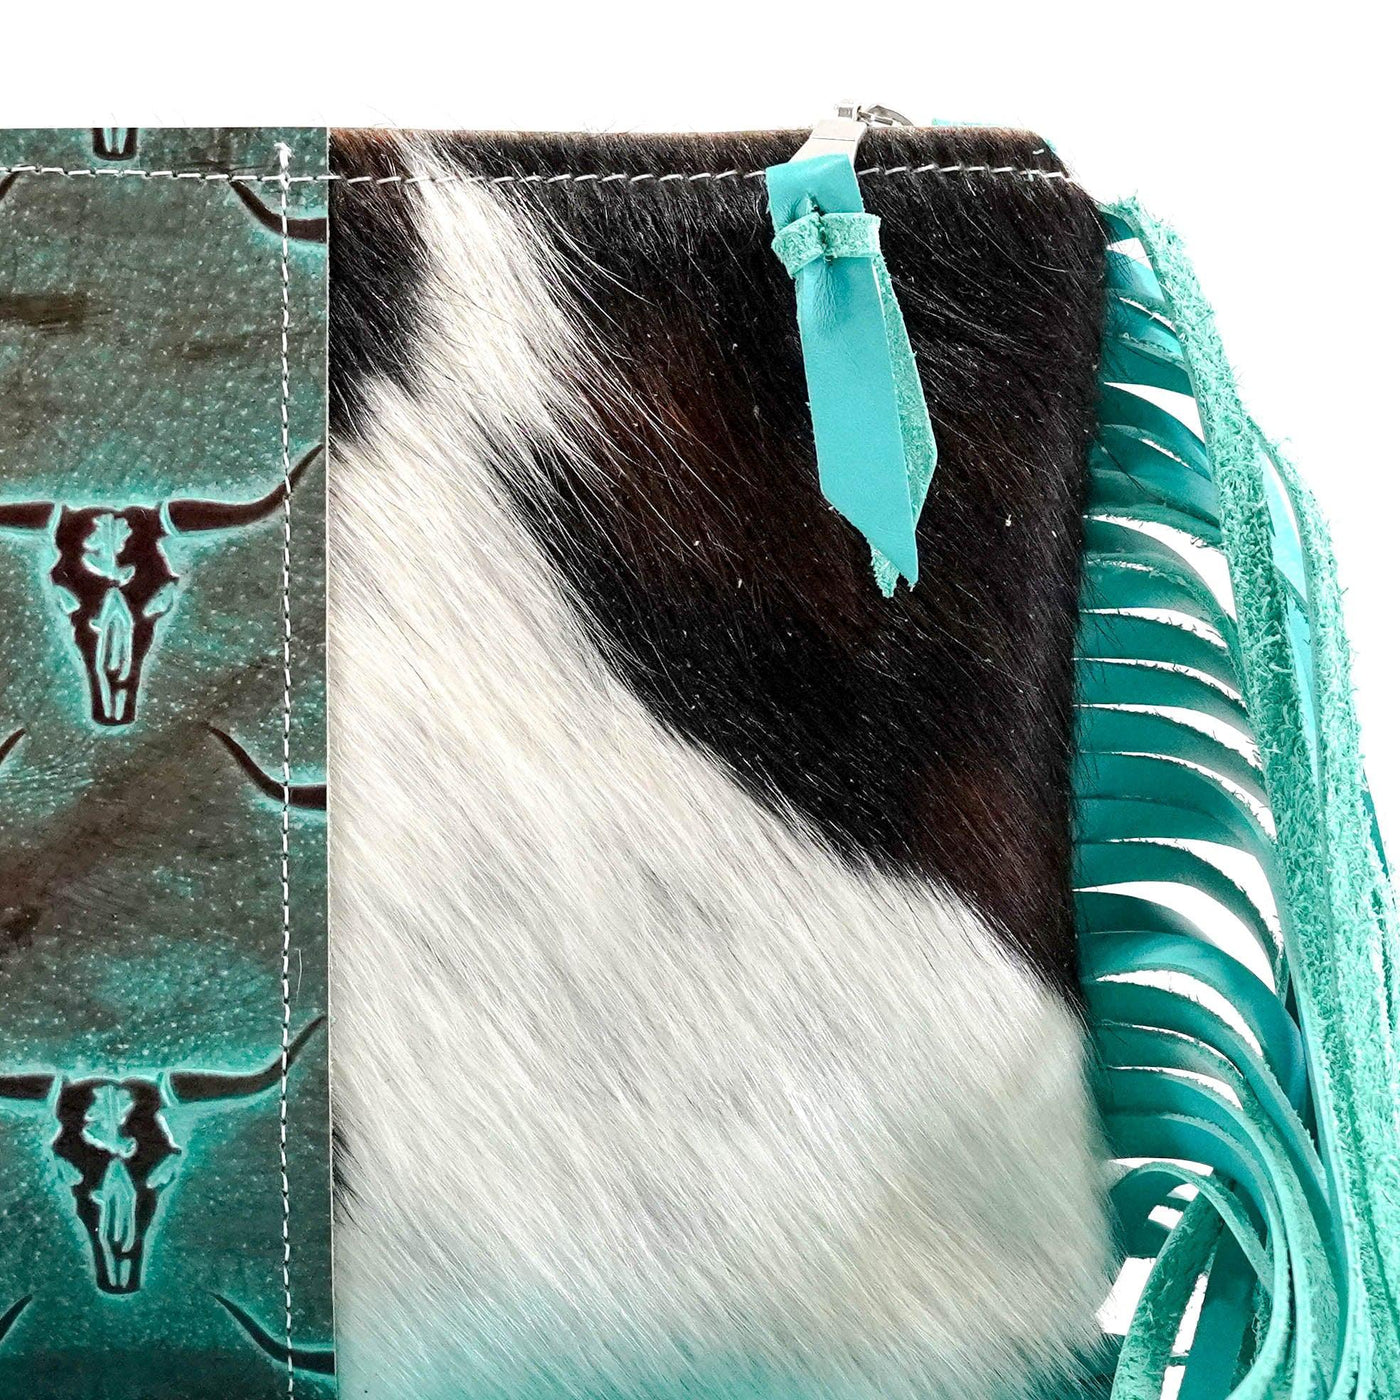 Patsy - Tricolor w/ Royston Skulls-Patsy-Western-Cowhide-Bags-Handmade-Products-Gifts-Dancing Cactus Designs